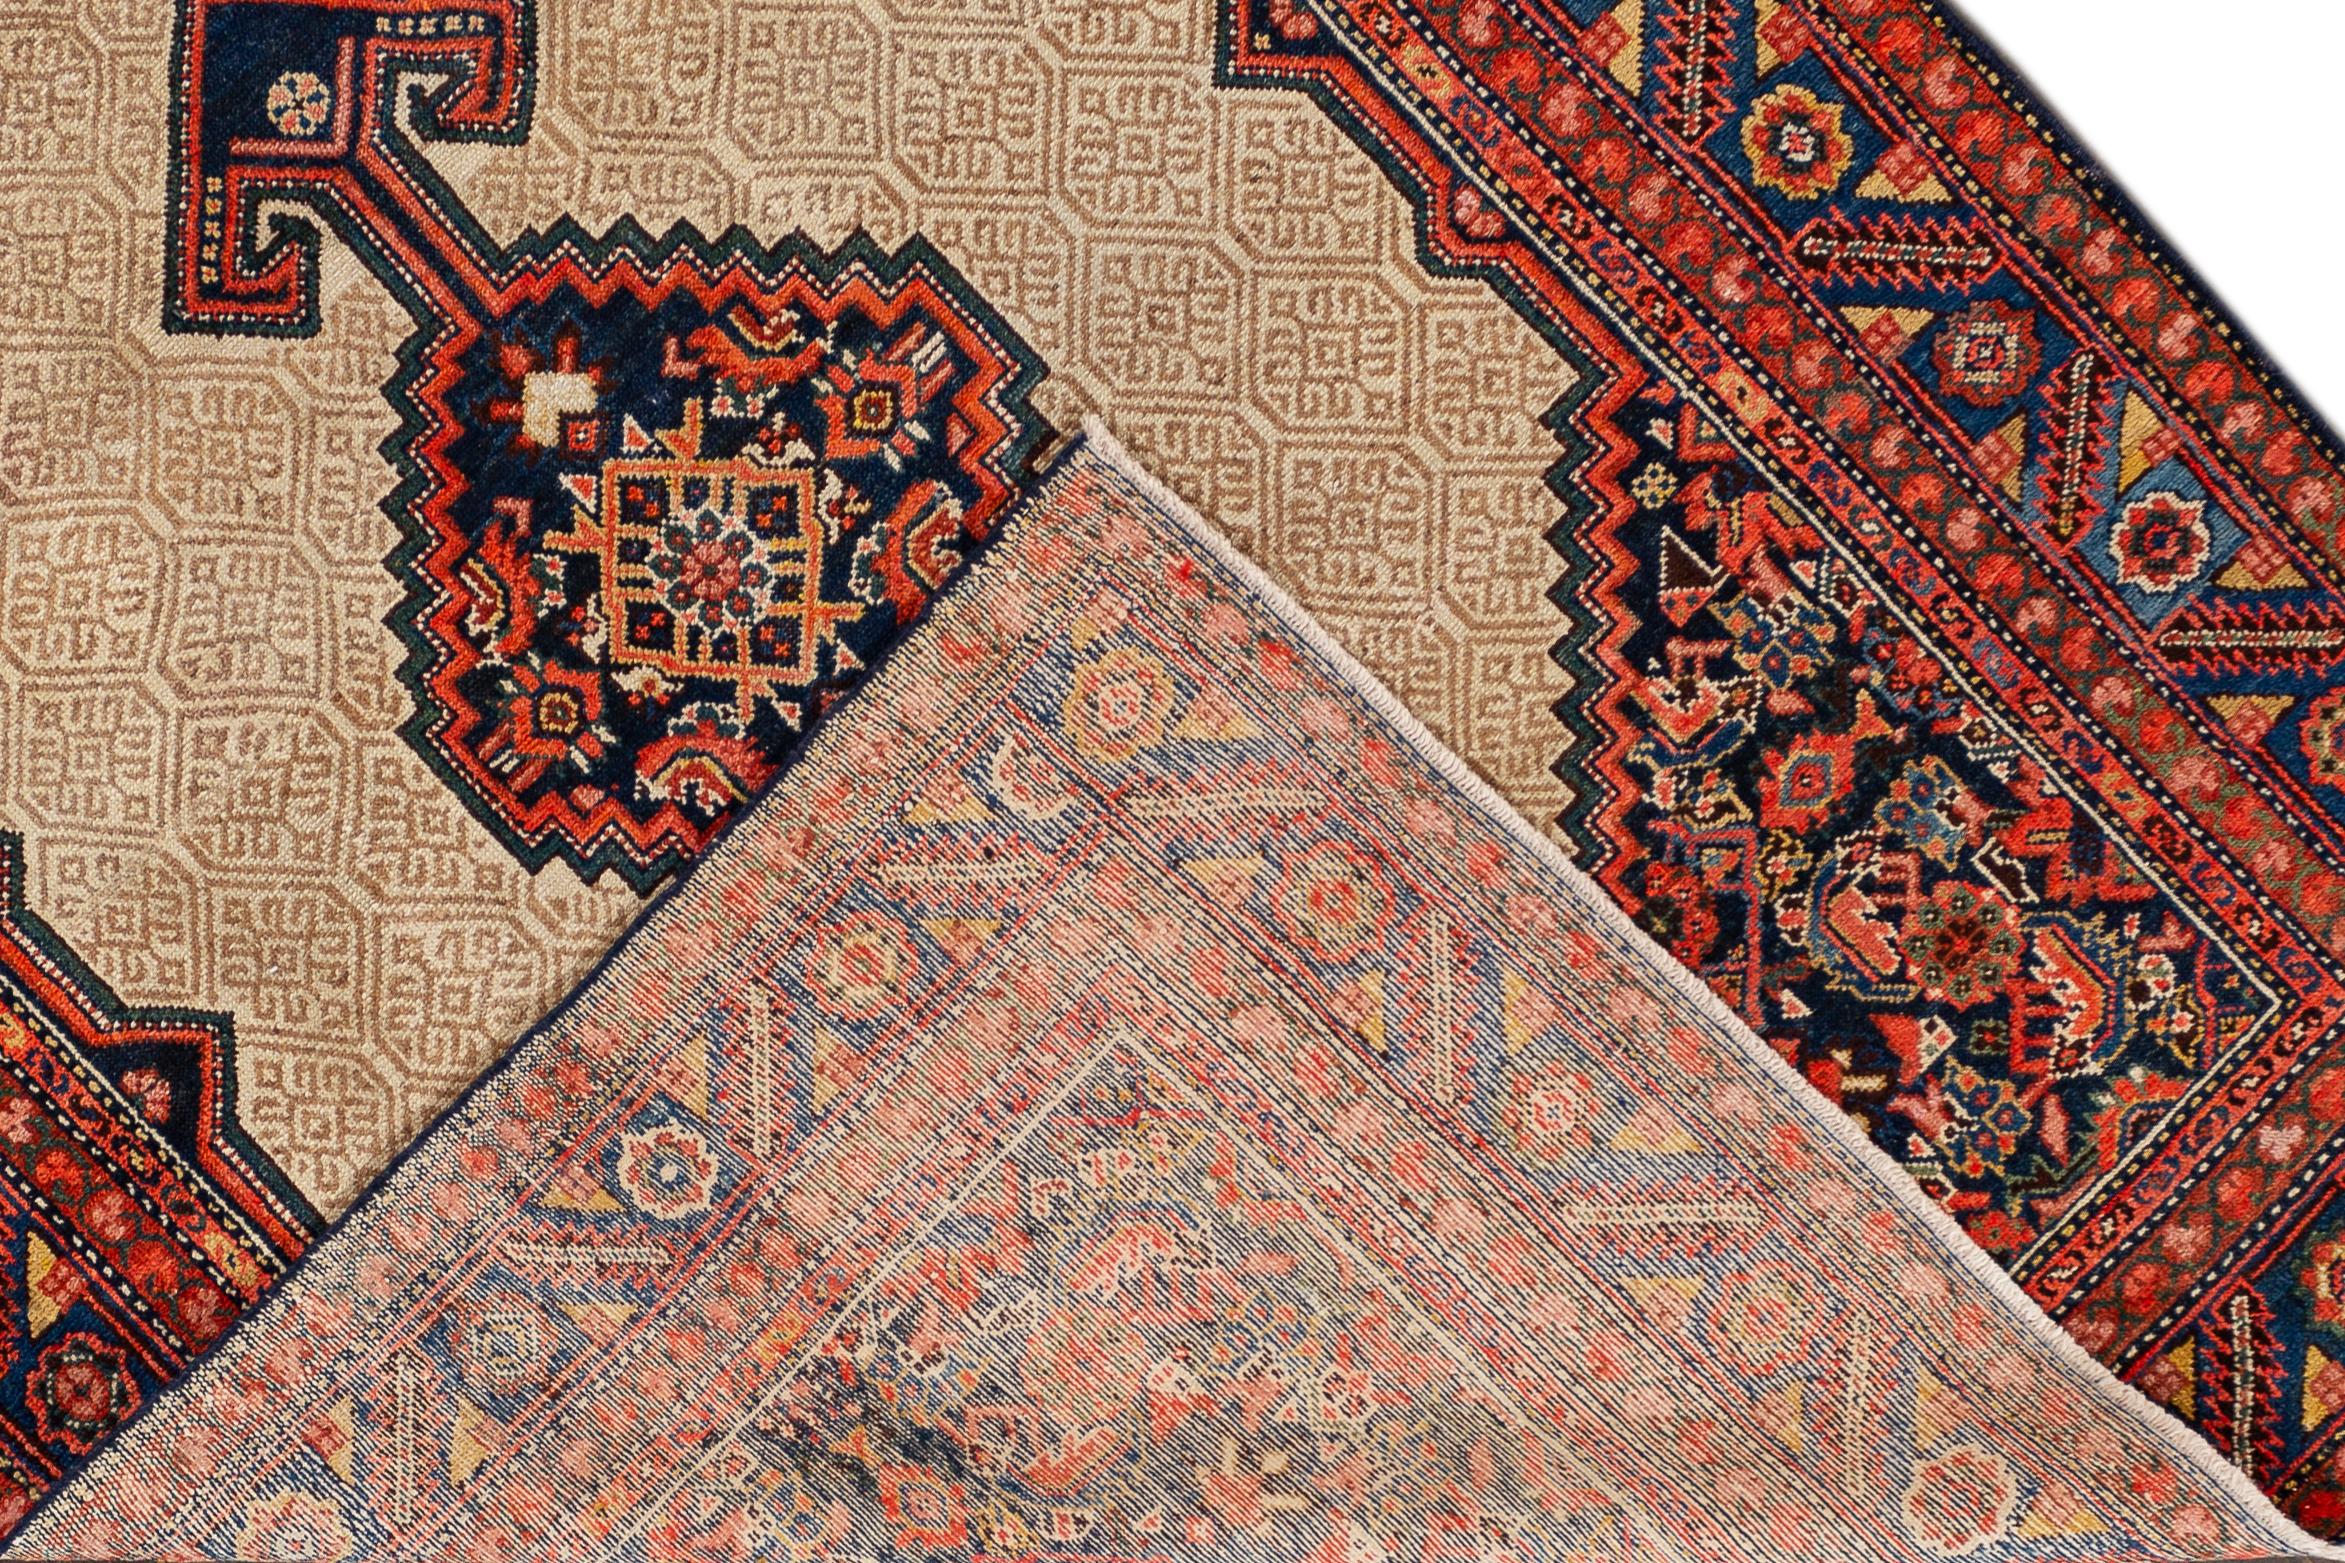 Early 20th century Scatter Hamadan rug, measures: 4'9